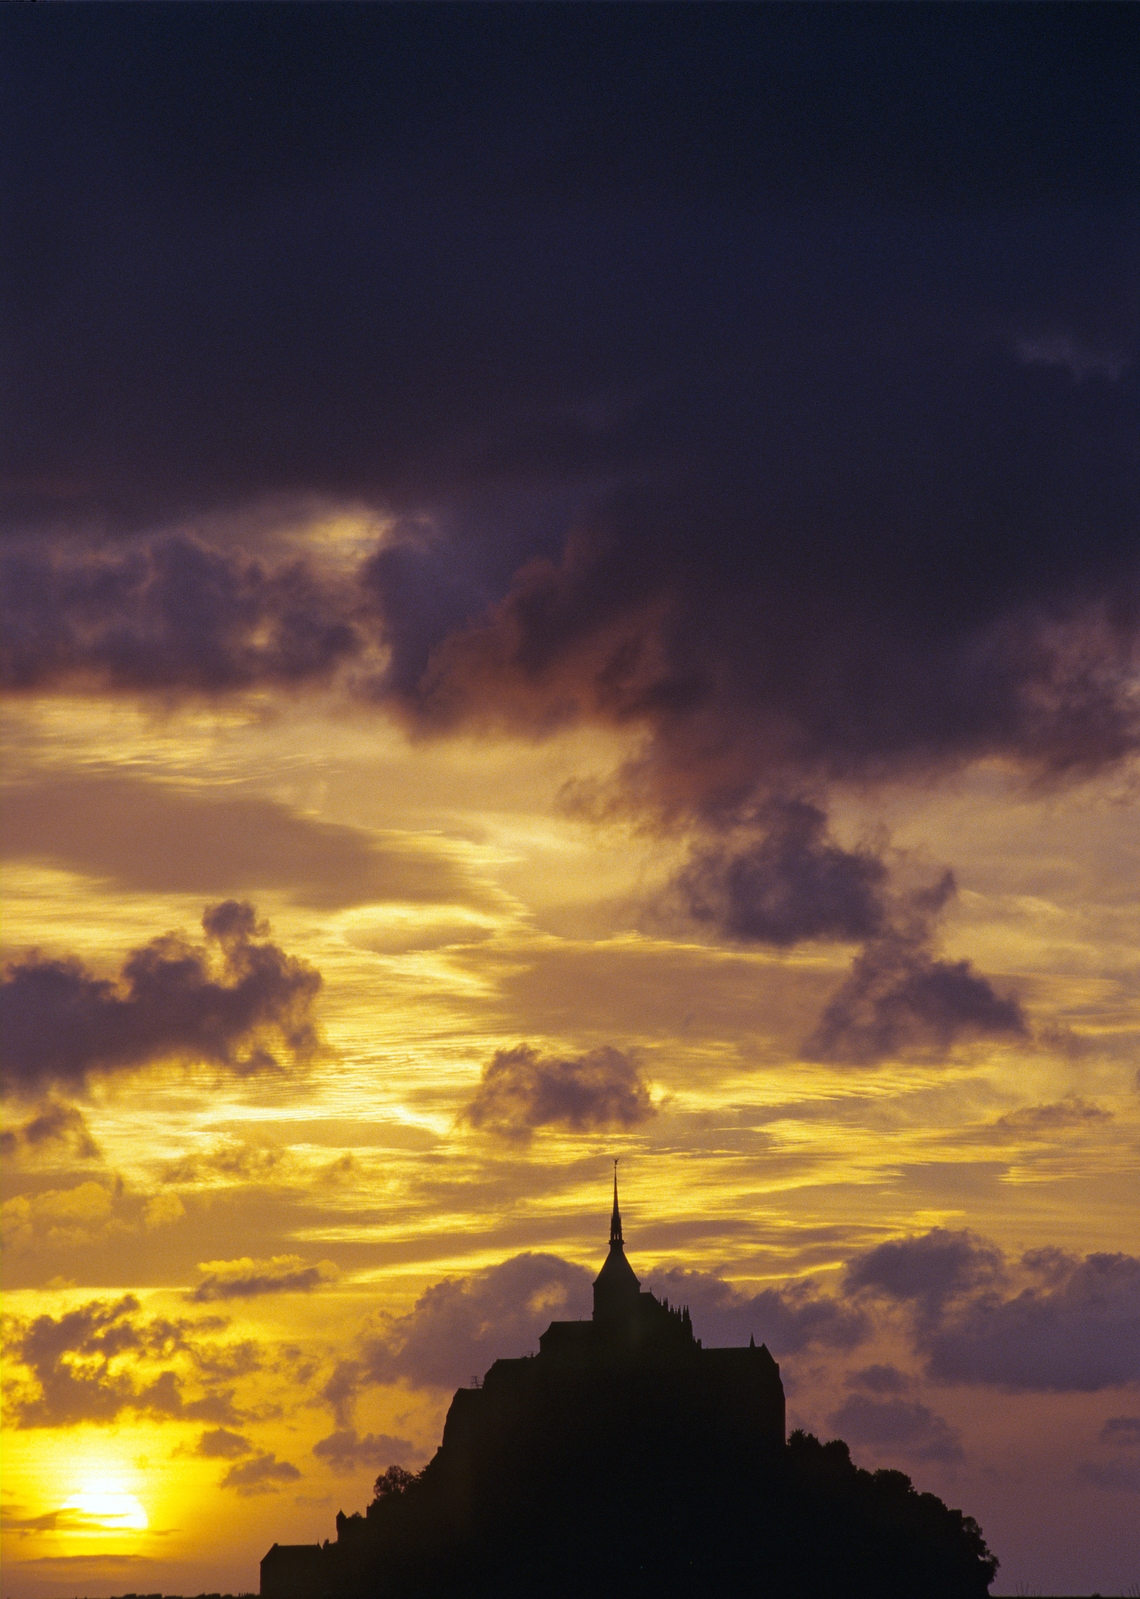 Image of Mont Saint-Michel from the Causeway  by Team PhotoHound